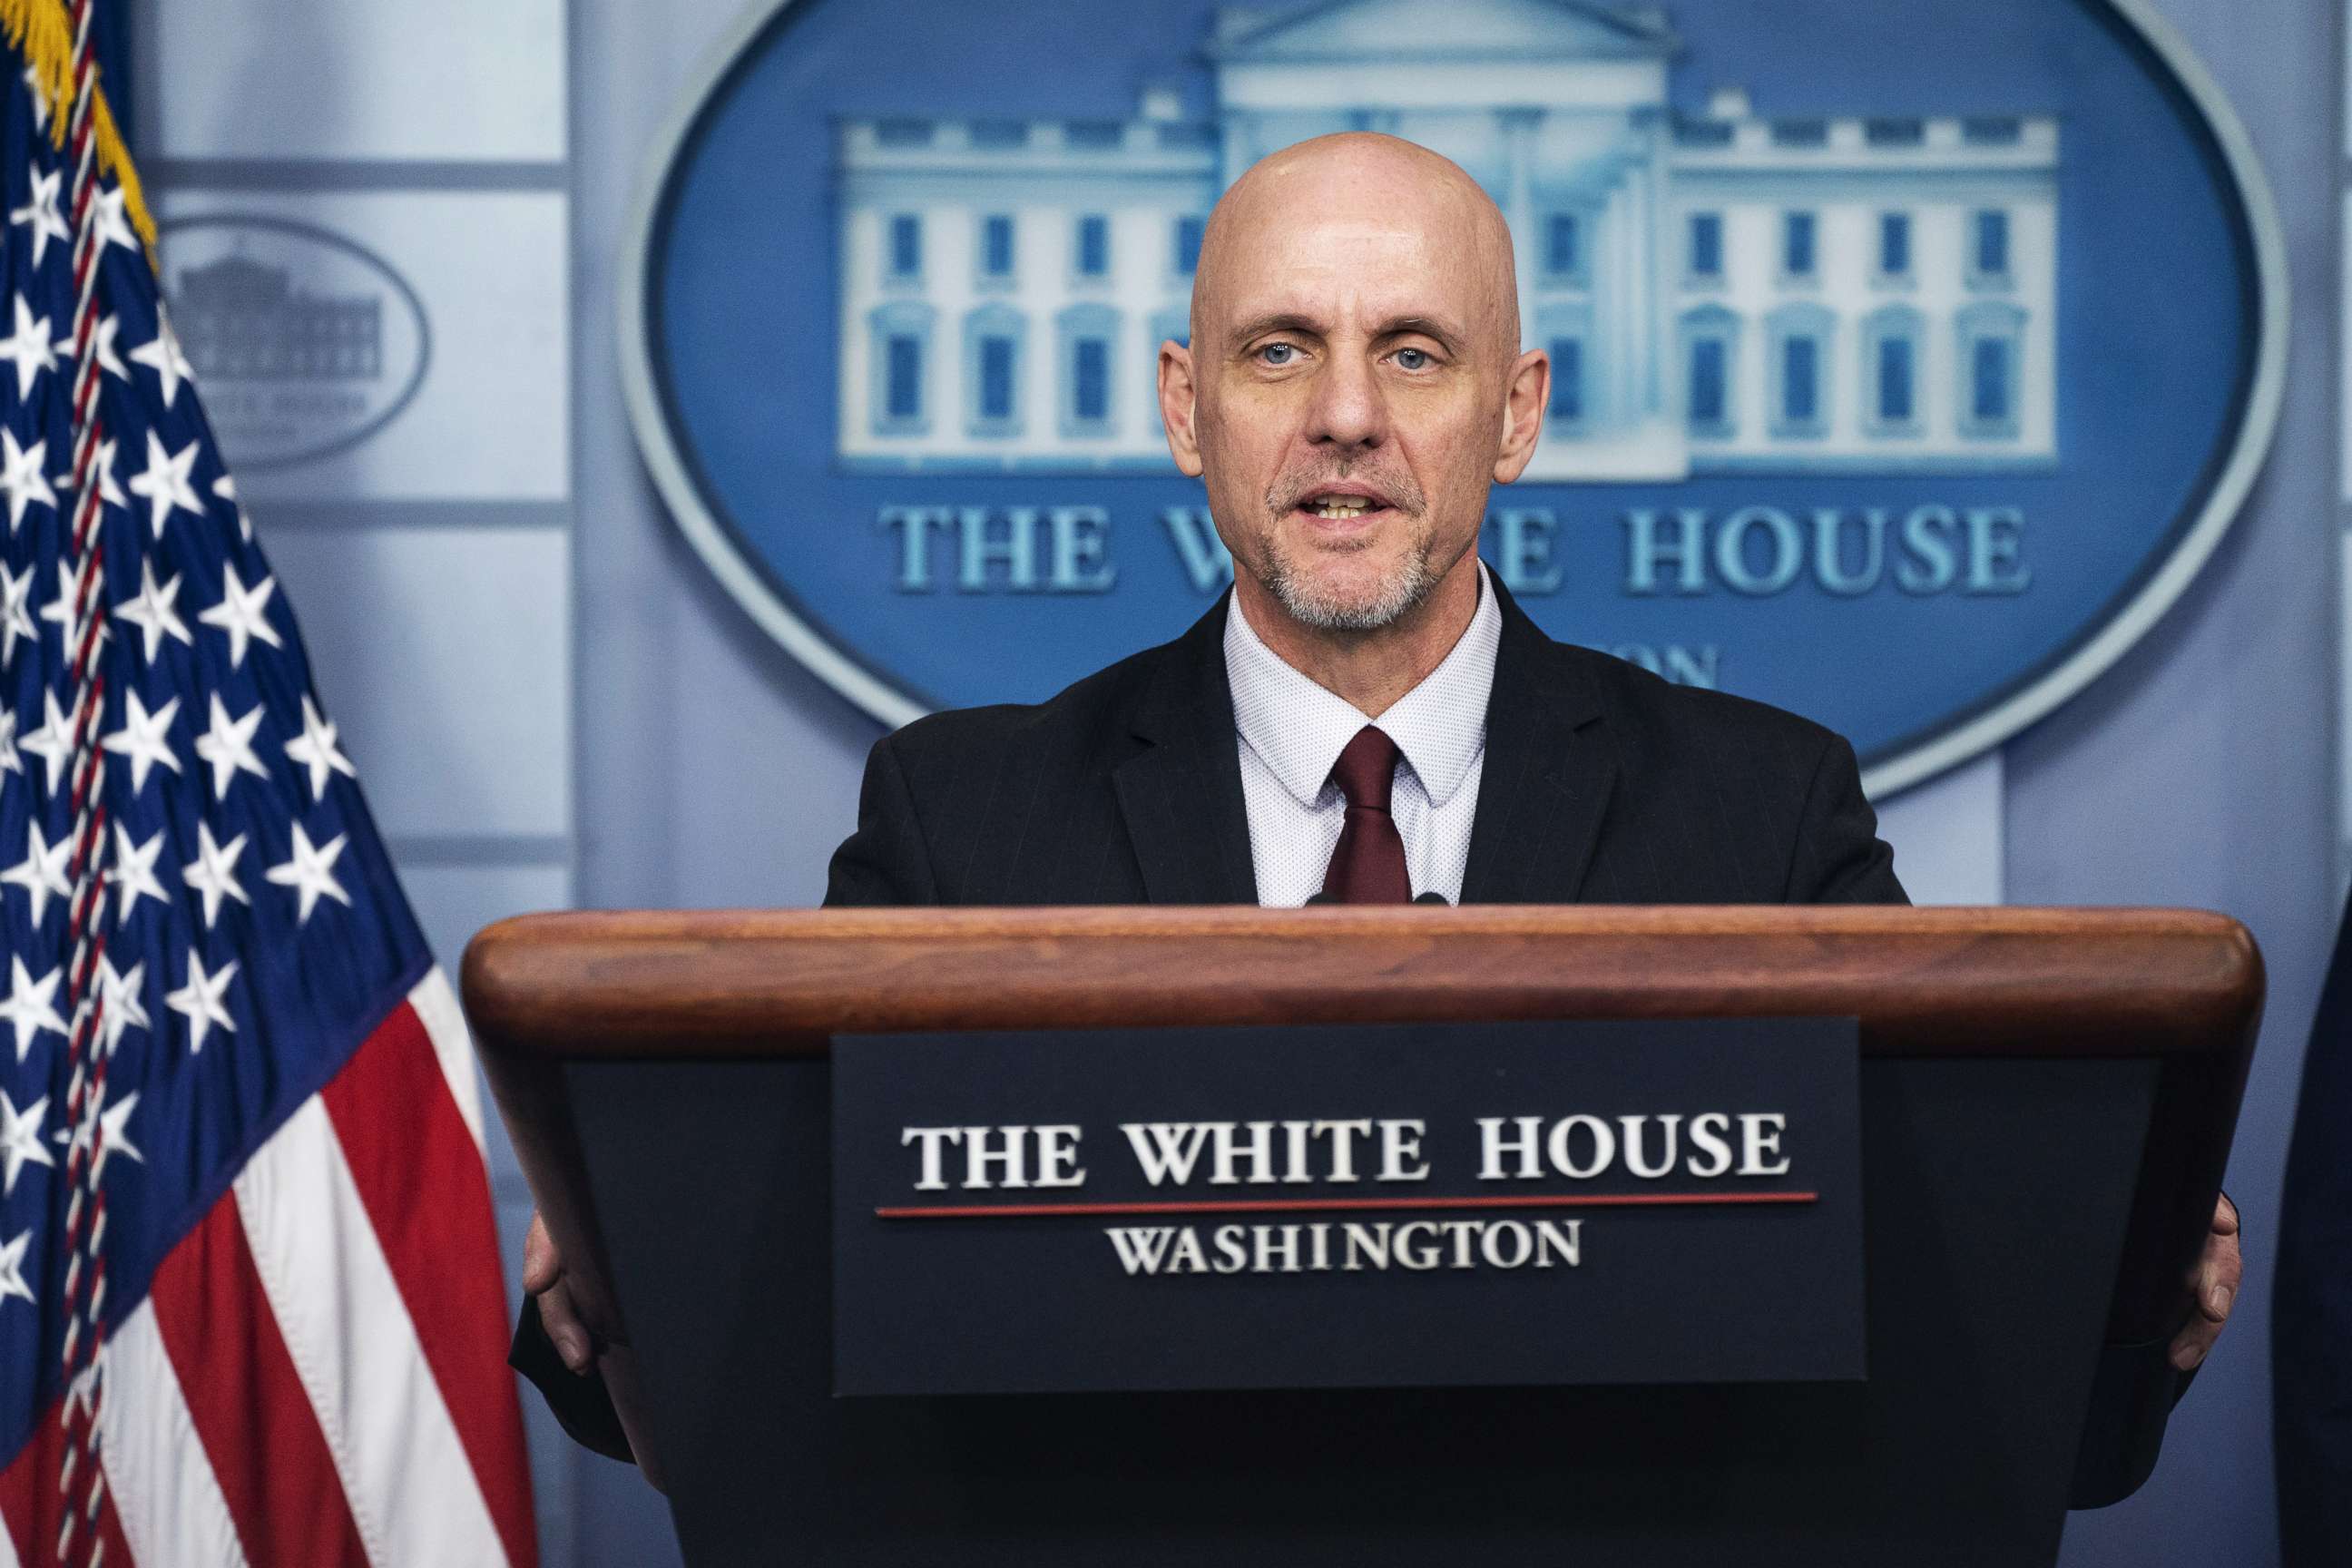 PHOTO: Stephen Hahn, commissioner of food and drugs at the Food and Drug Administration (FDA), speaks at a press briefing with members of the White House Coronavirus Task Force, April 4, 2020 in Washington.